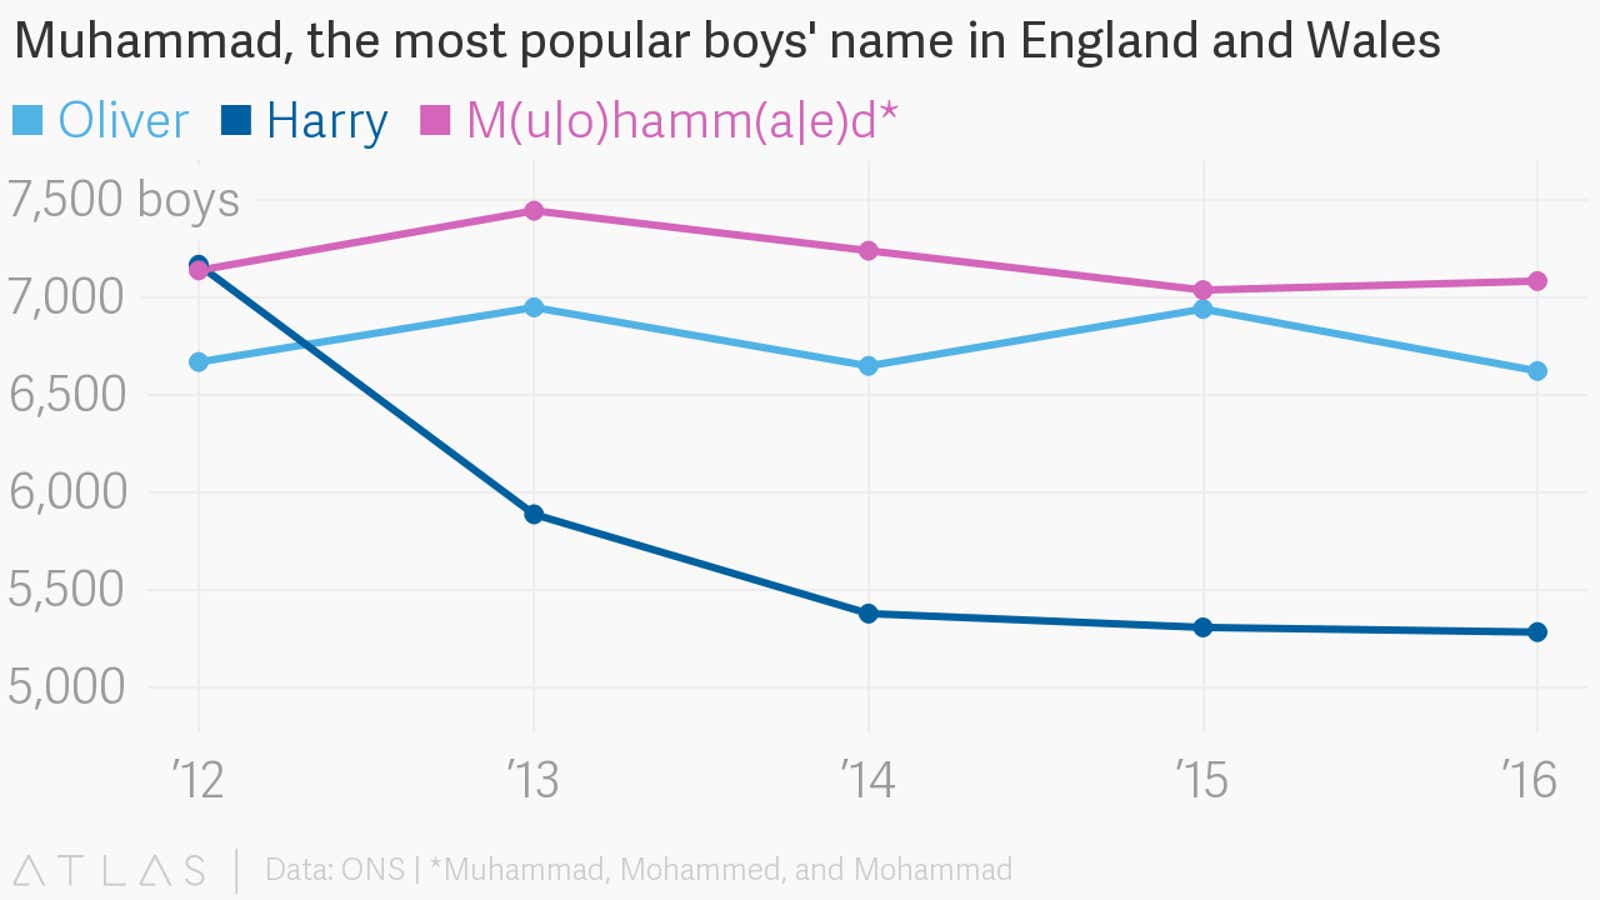 England says Oliver is the most popular boys’ name, but it’s actually Muhammad